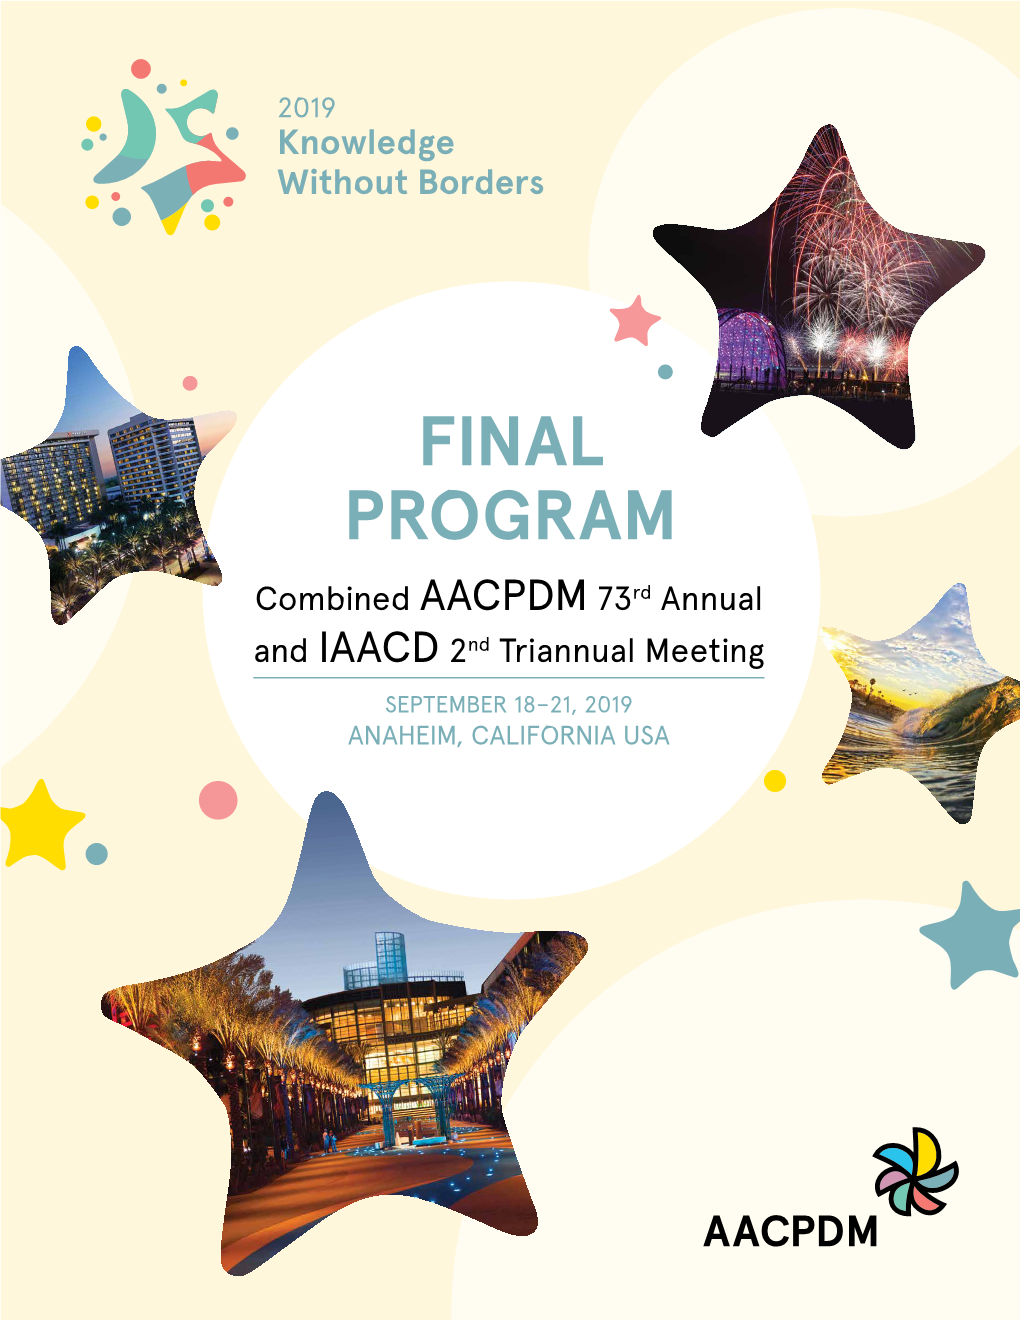 FINAL PROGRAM Combined AACPDM 73Rd Annual and IAACD 2Nd Triannual Meeting SEPTEMBER 18–21, 2019 ANAHEIM, CALIFORNIA USA Stop by Booth #407